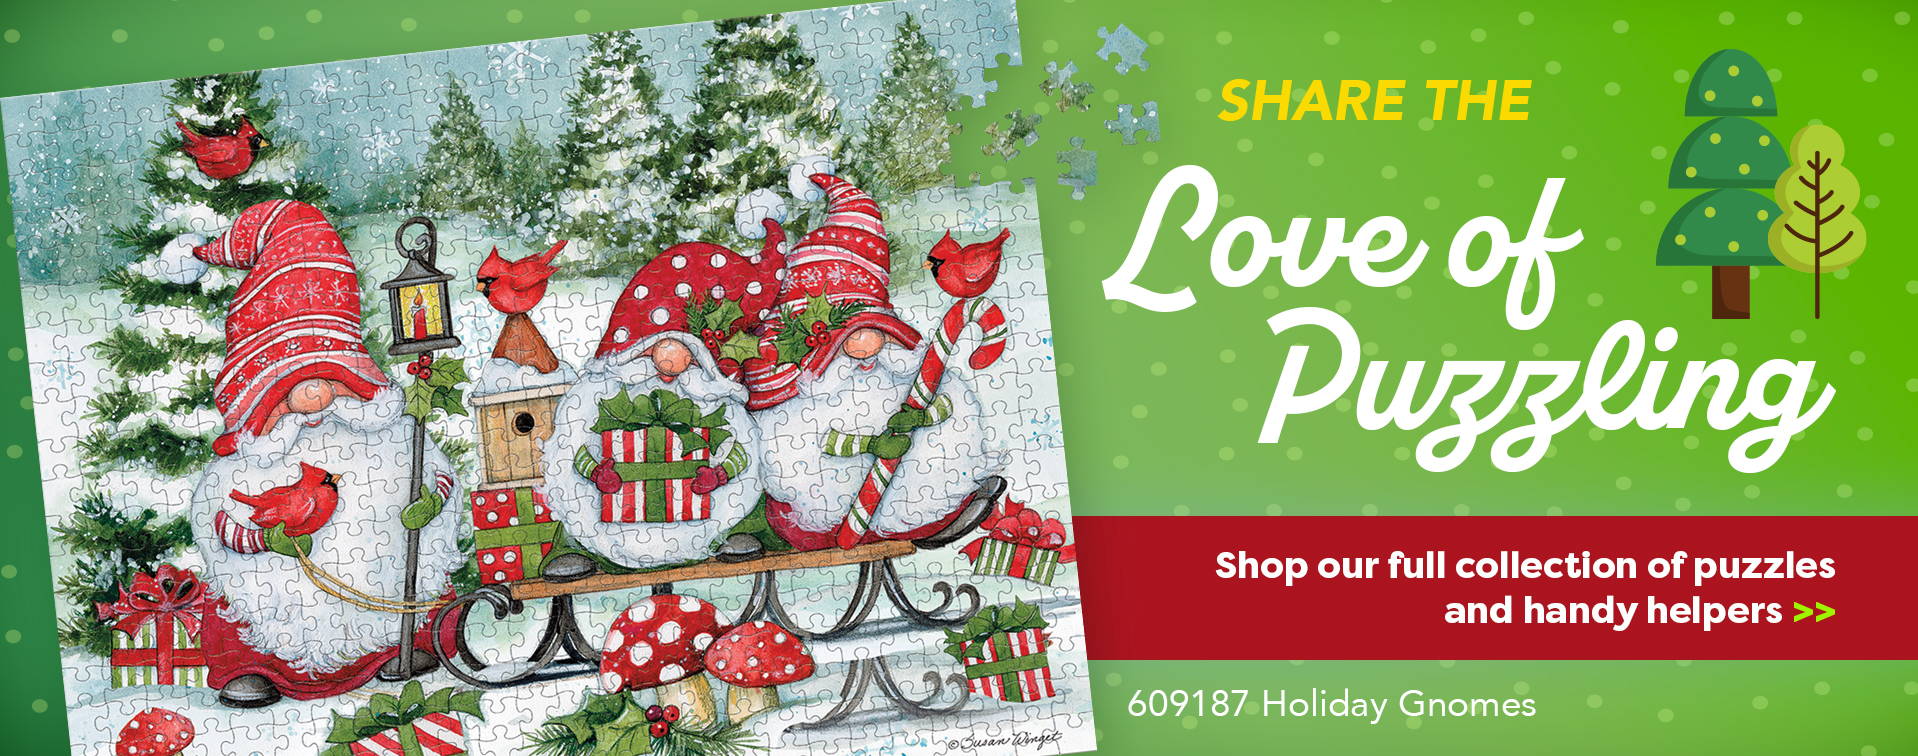 Share the Love of Puzzling. Shop our full collection of puzzles and handy helpers.